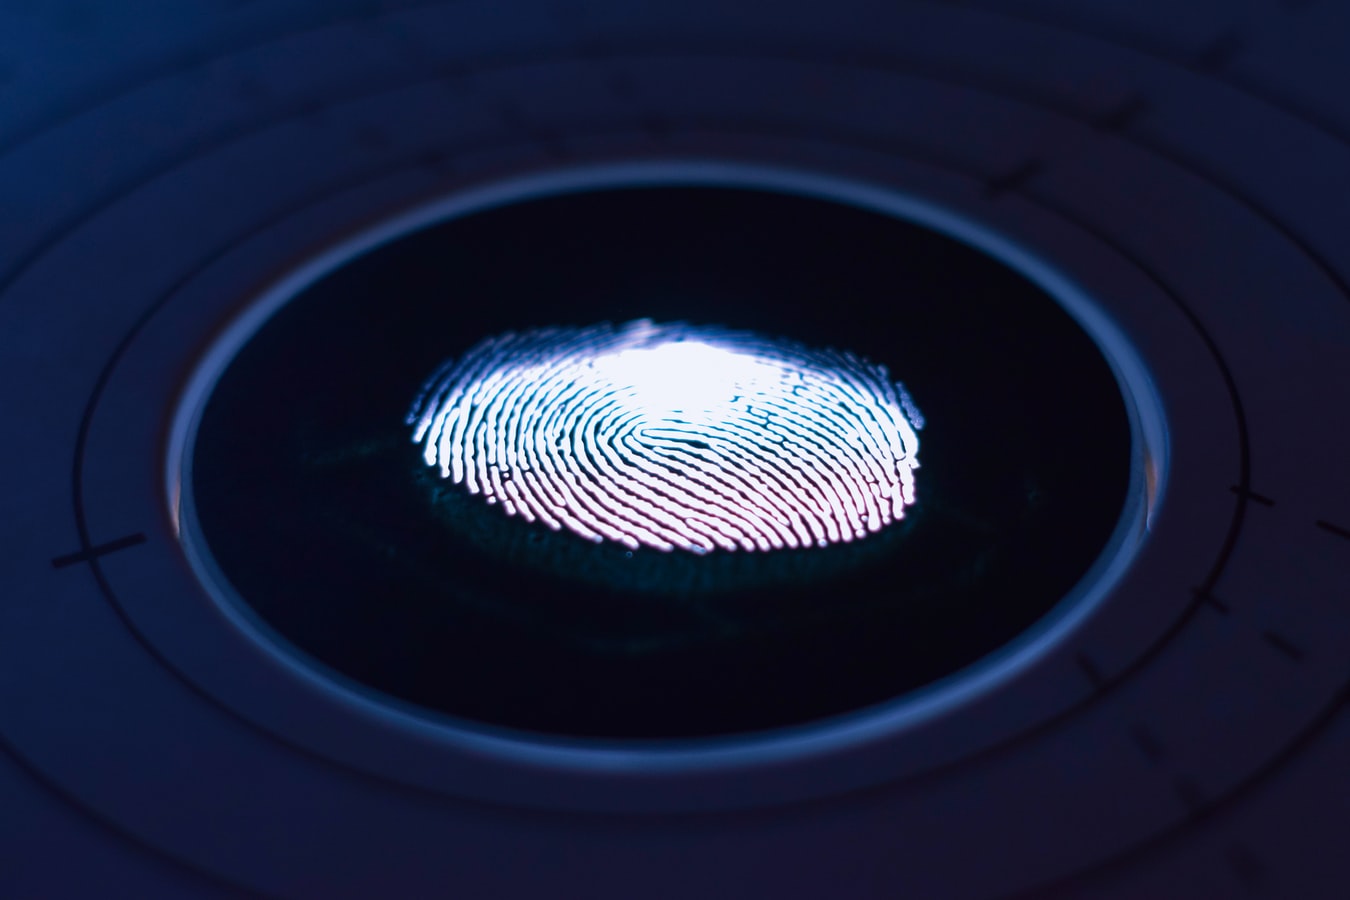 Illinois Biometric Information Privacy Act, It’s Better Safe Than Sorry!